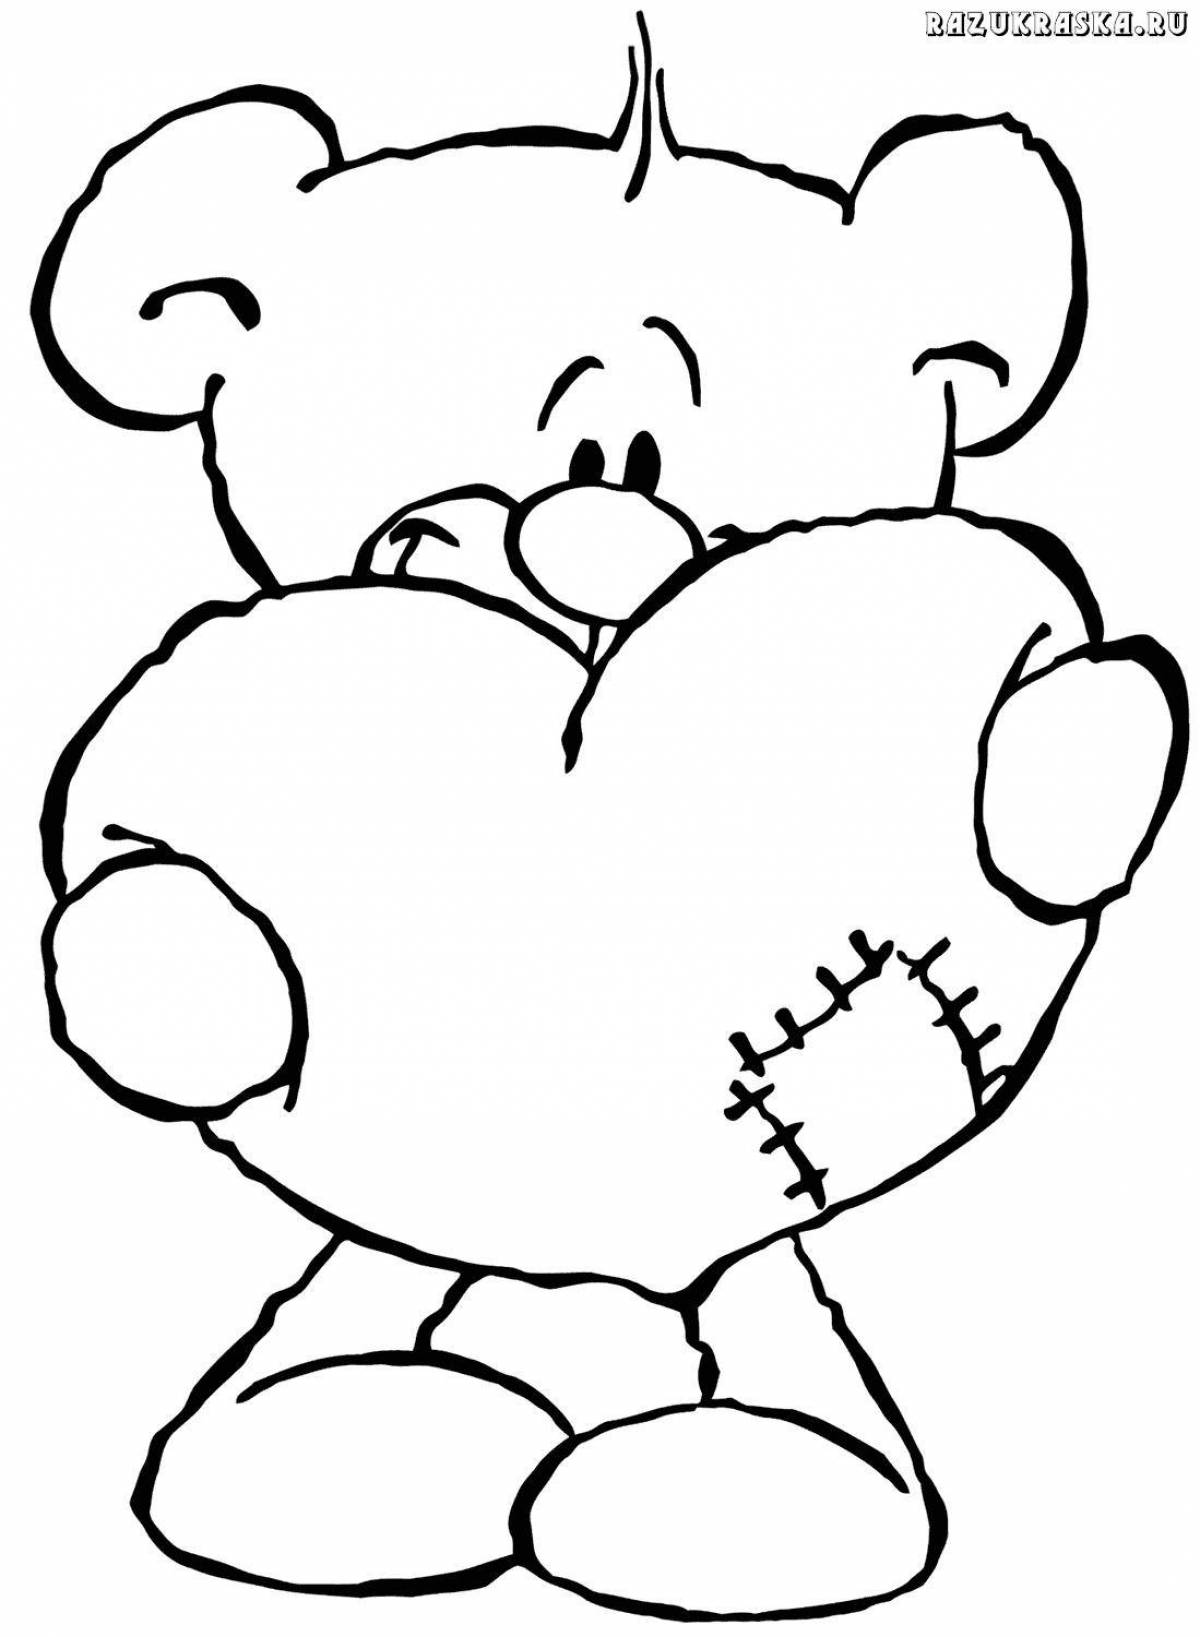 Coloring book beautiful teddy bear with a heart